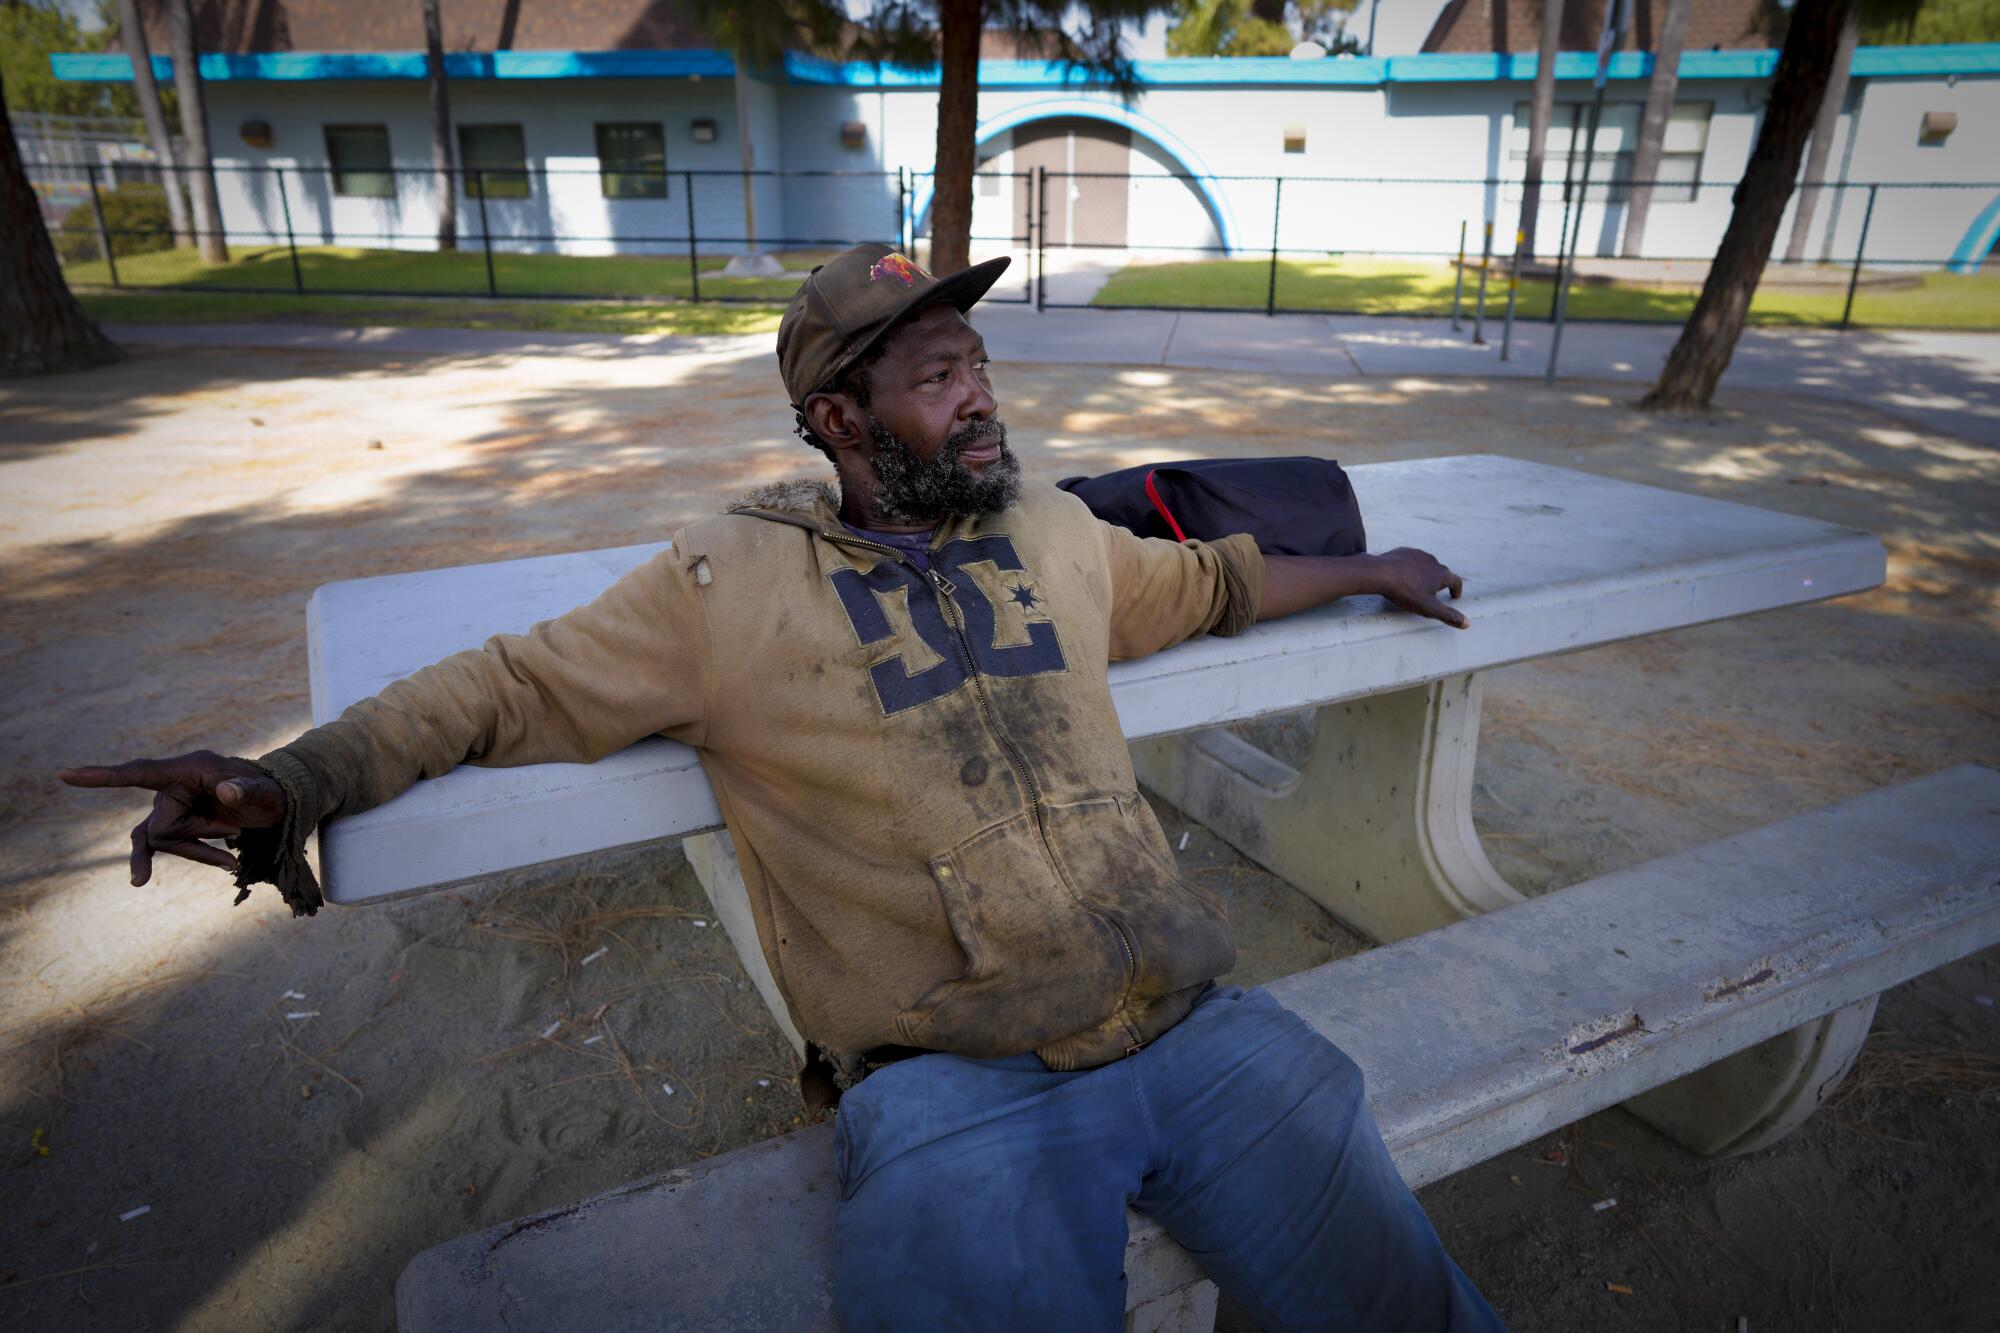 Matthew Clark says he has been living on the streets between el Cajon and downtown San Diego for the past 4-years.